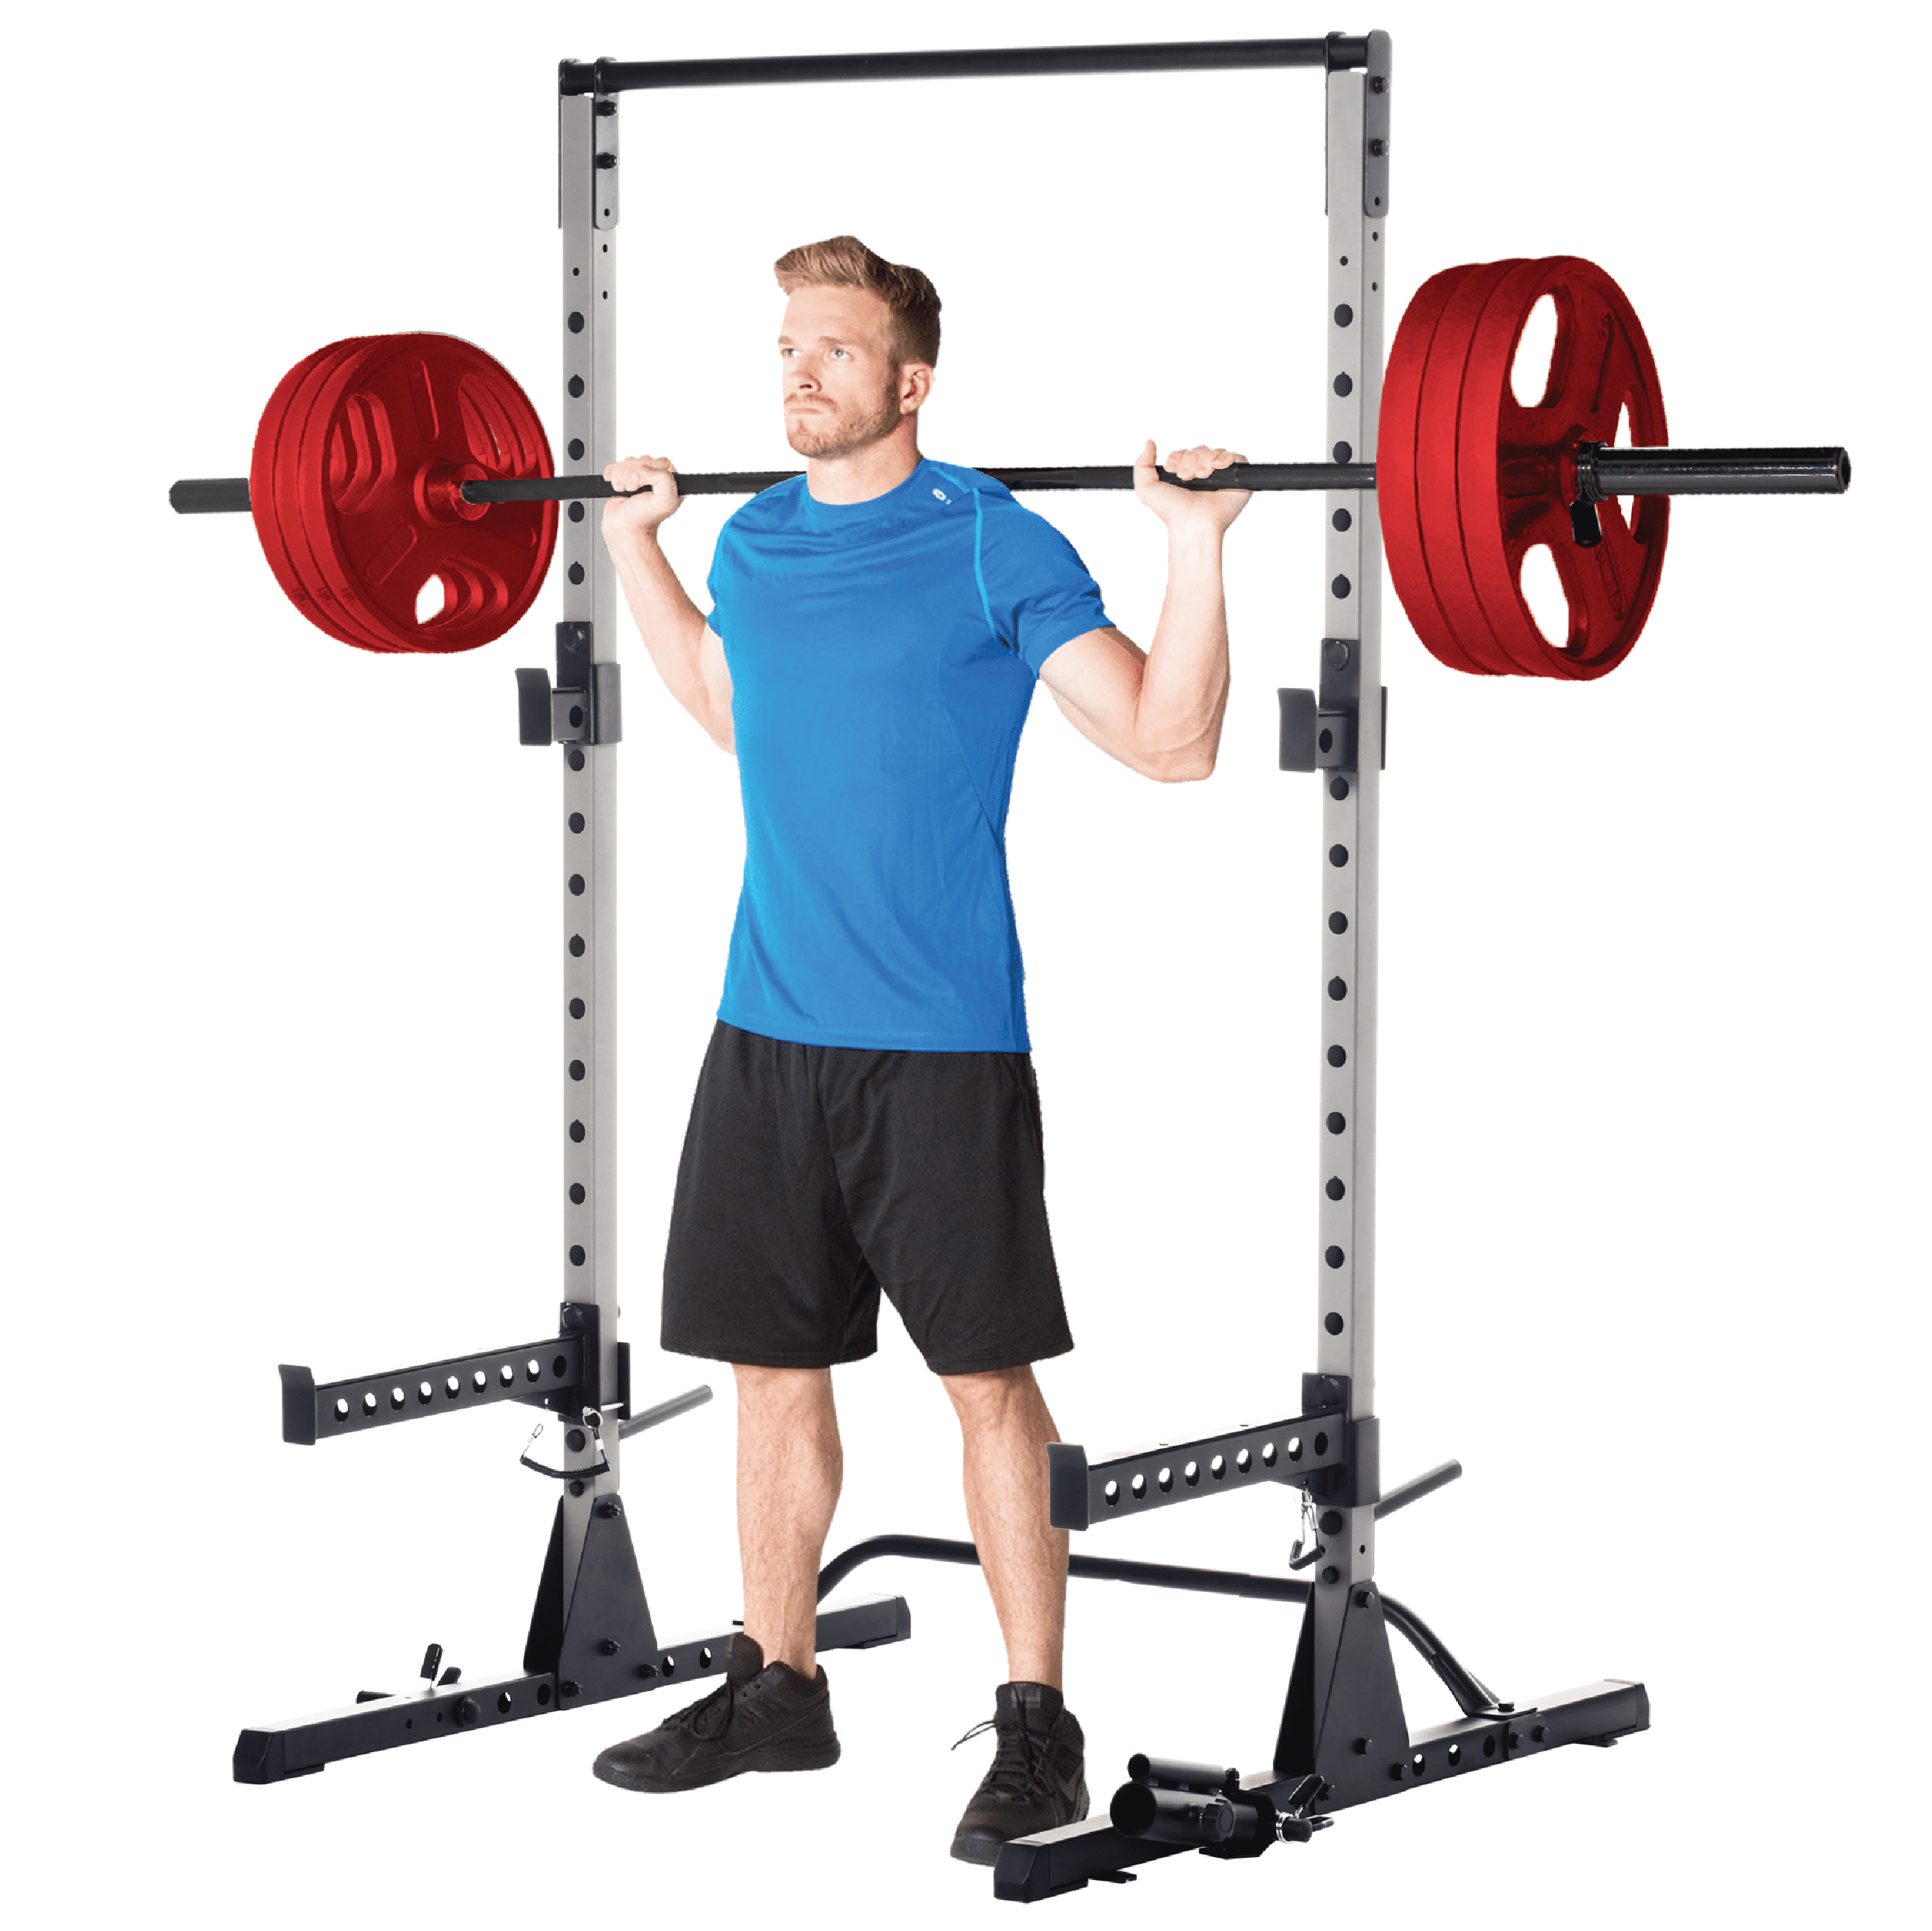 Wall Mounted Weight Plate Rack as Barbell Rack Wall Mount Home Gym Accessories for Fitness for Gym organizer Athletics and Exercise Weight Rack Barbell Bar Barbell Holder and Olympic Plate Rack